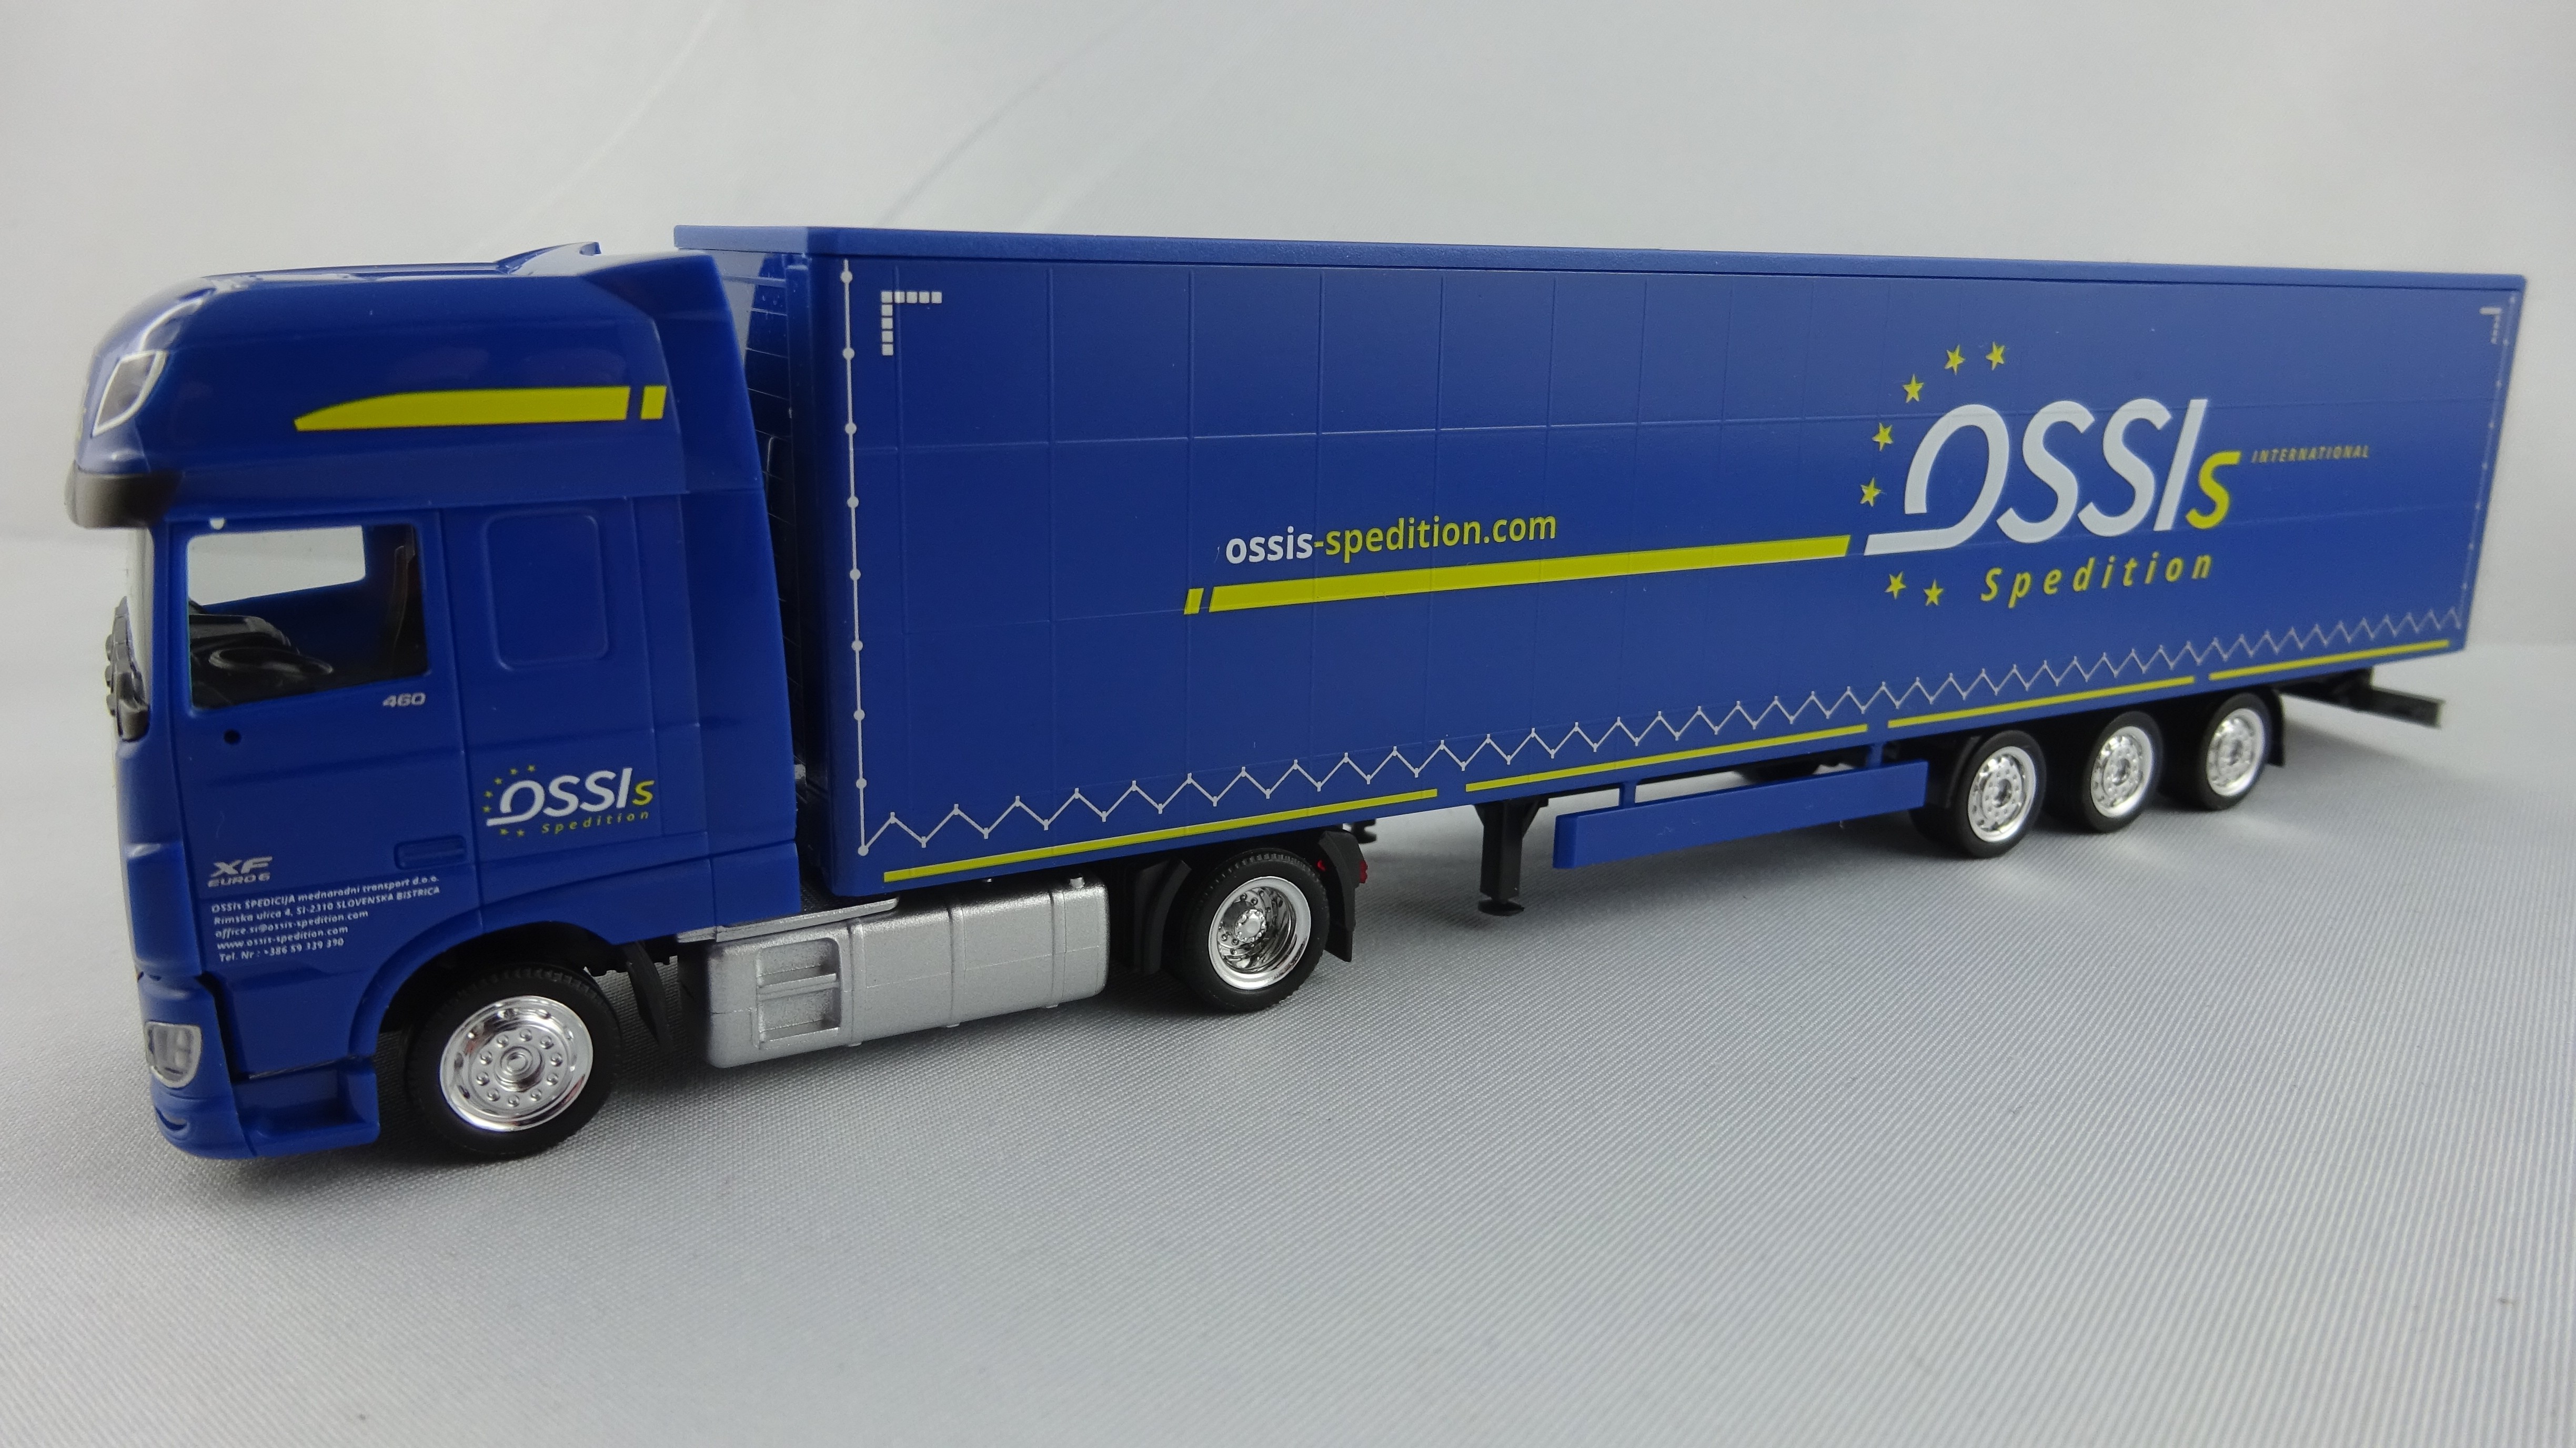 Herpa DAF XF 105 SSC E6 "Ossis Spedition